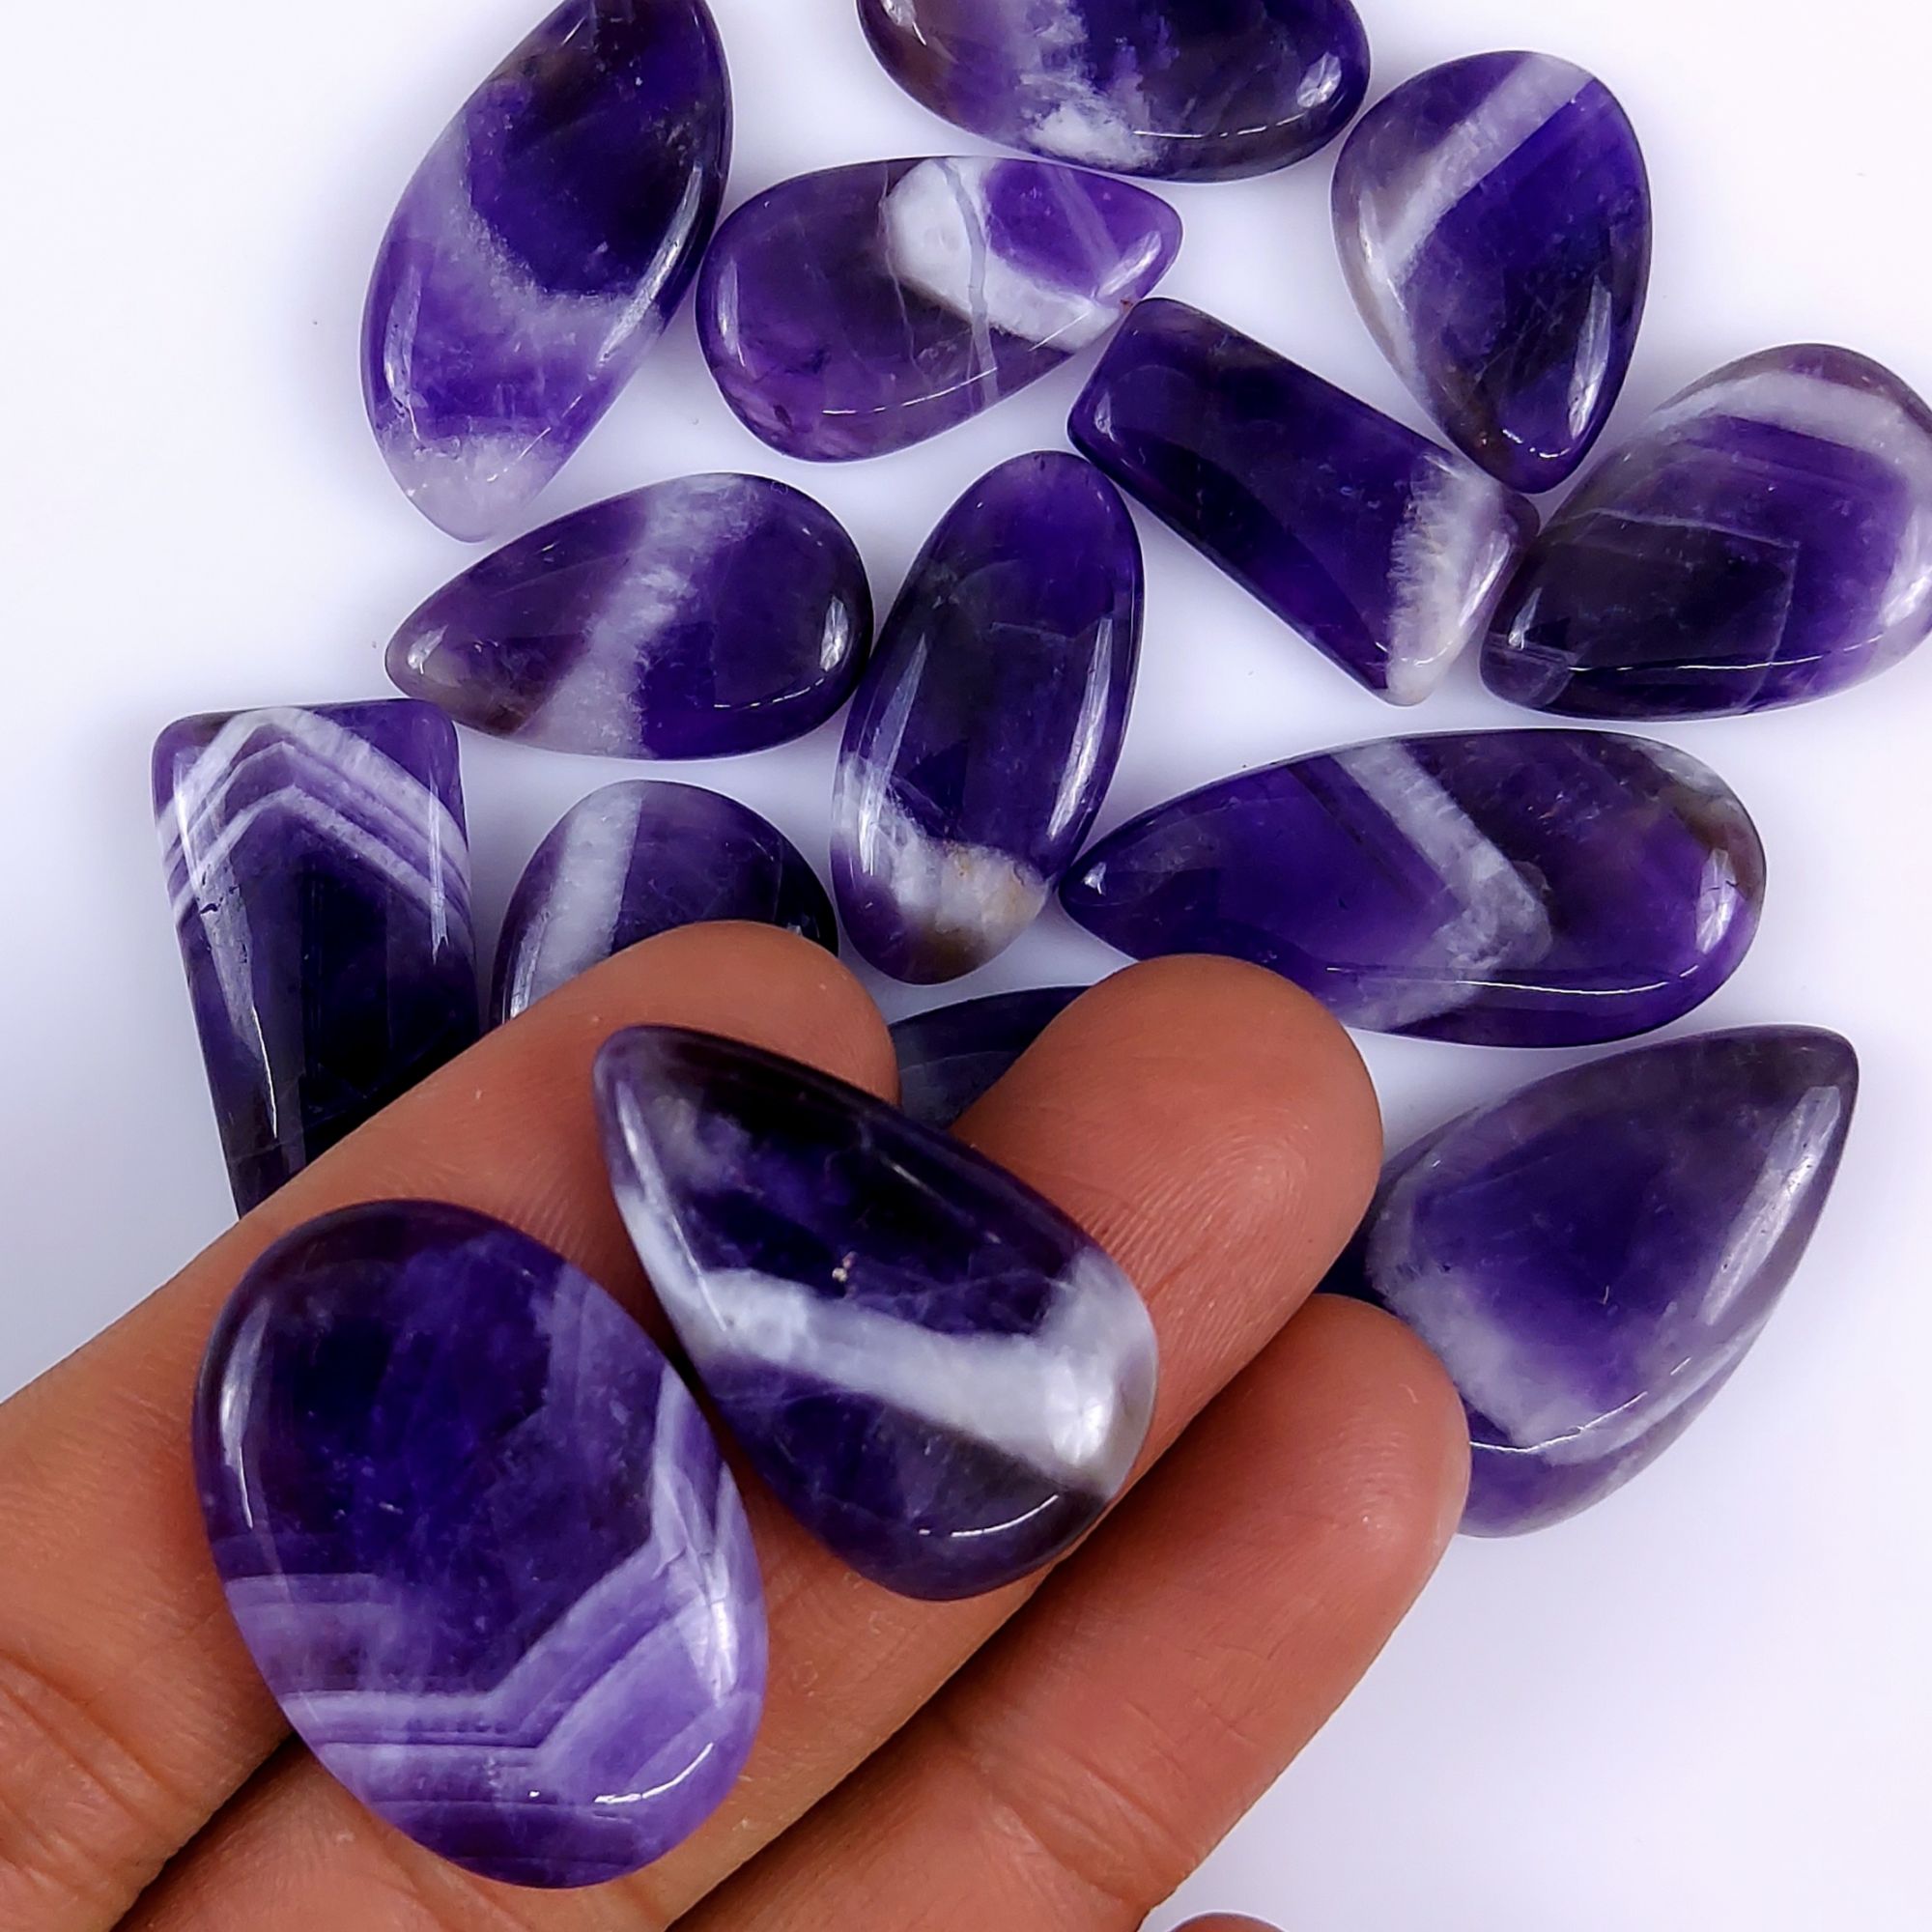 15Pcs 280Cts Natural Amethyst Cabochon lot Gemstone Purple Crystal Mix Shape Loose Gemstone beads for jewelry Making 30x20 20x14mm #7508